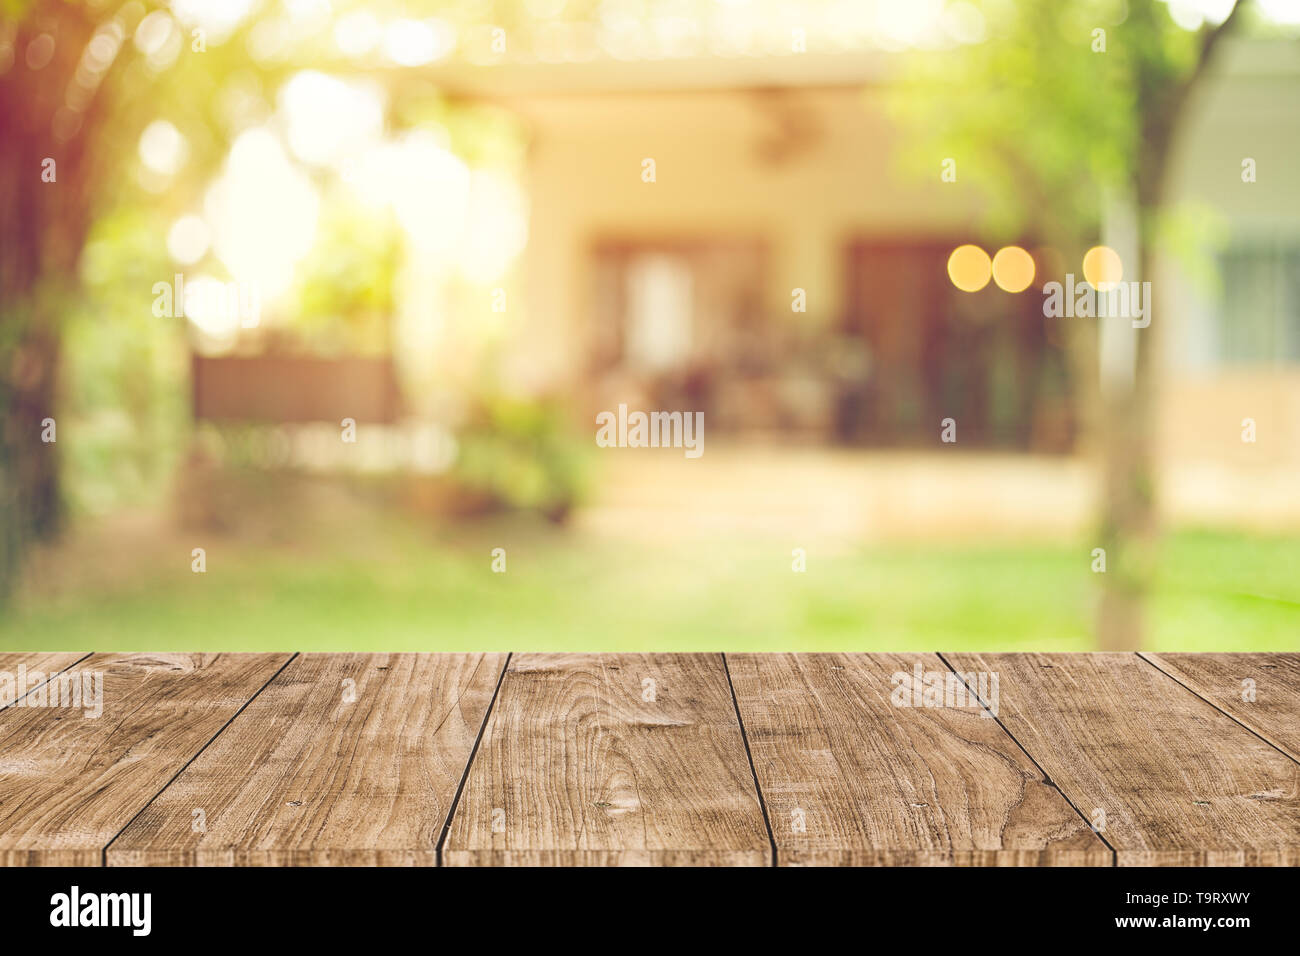 wooden table space with green home backyard view blur background for advertising template Stock Photo